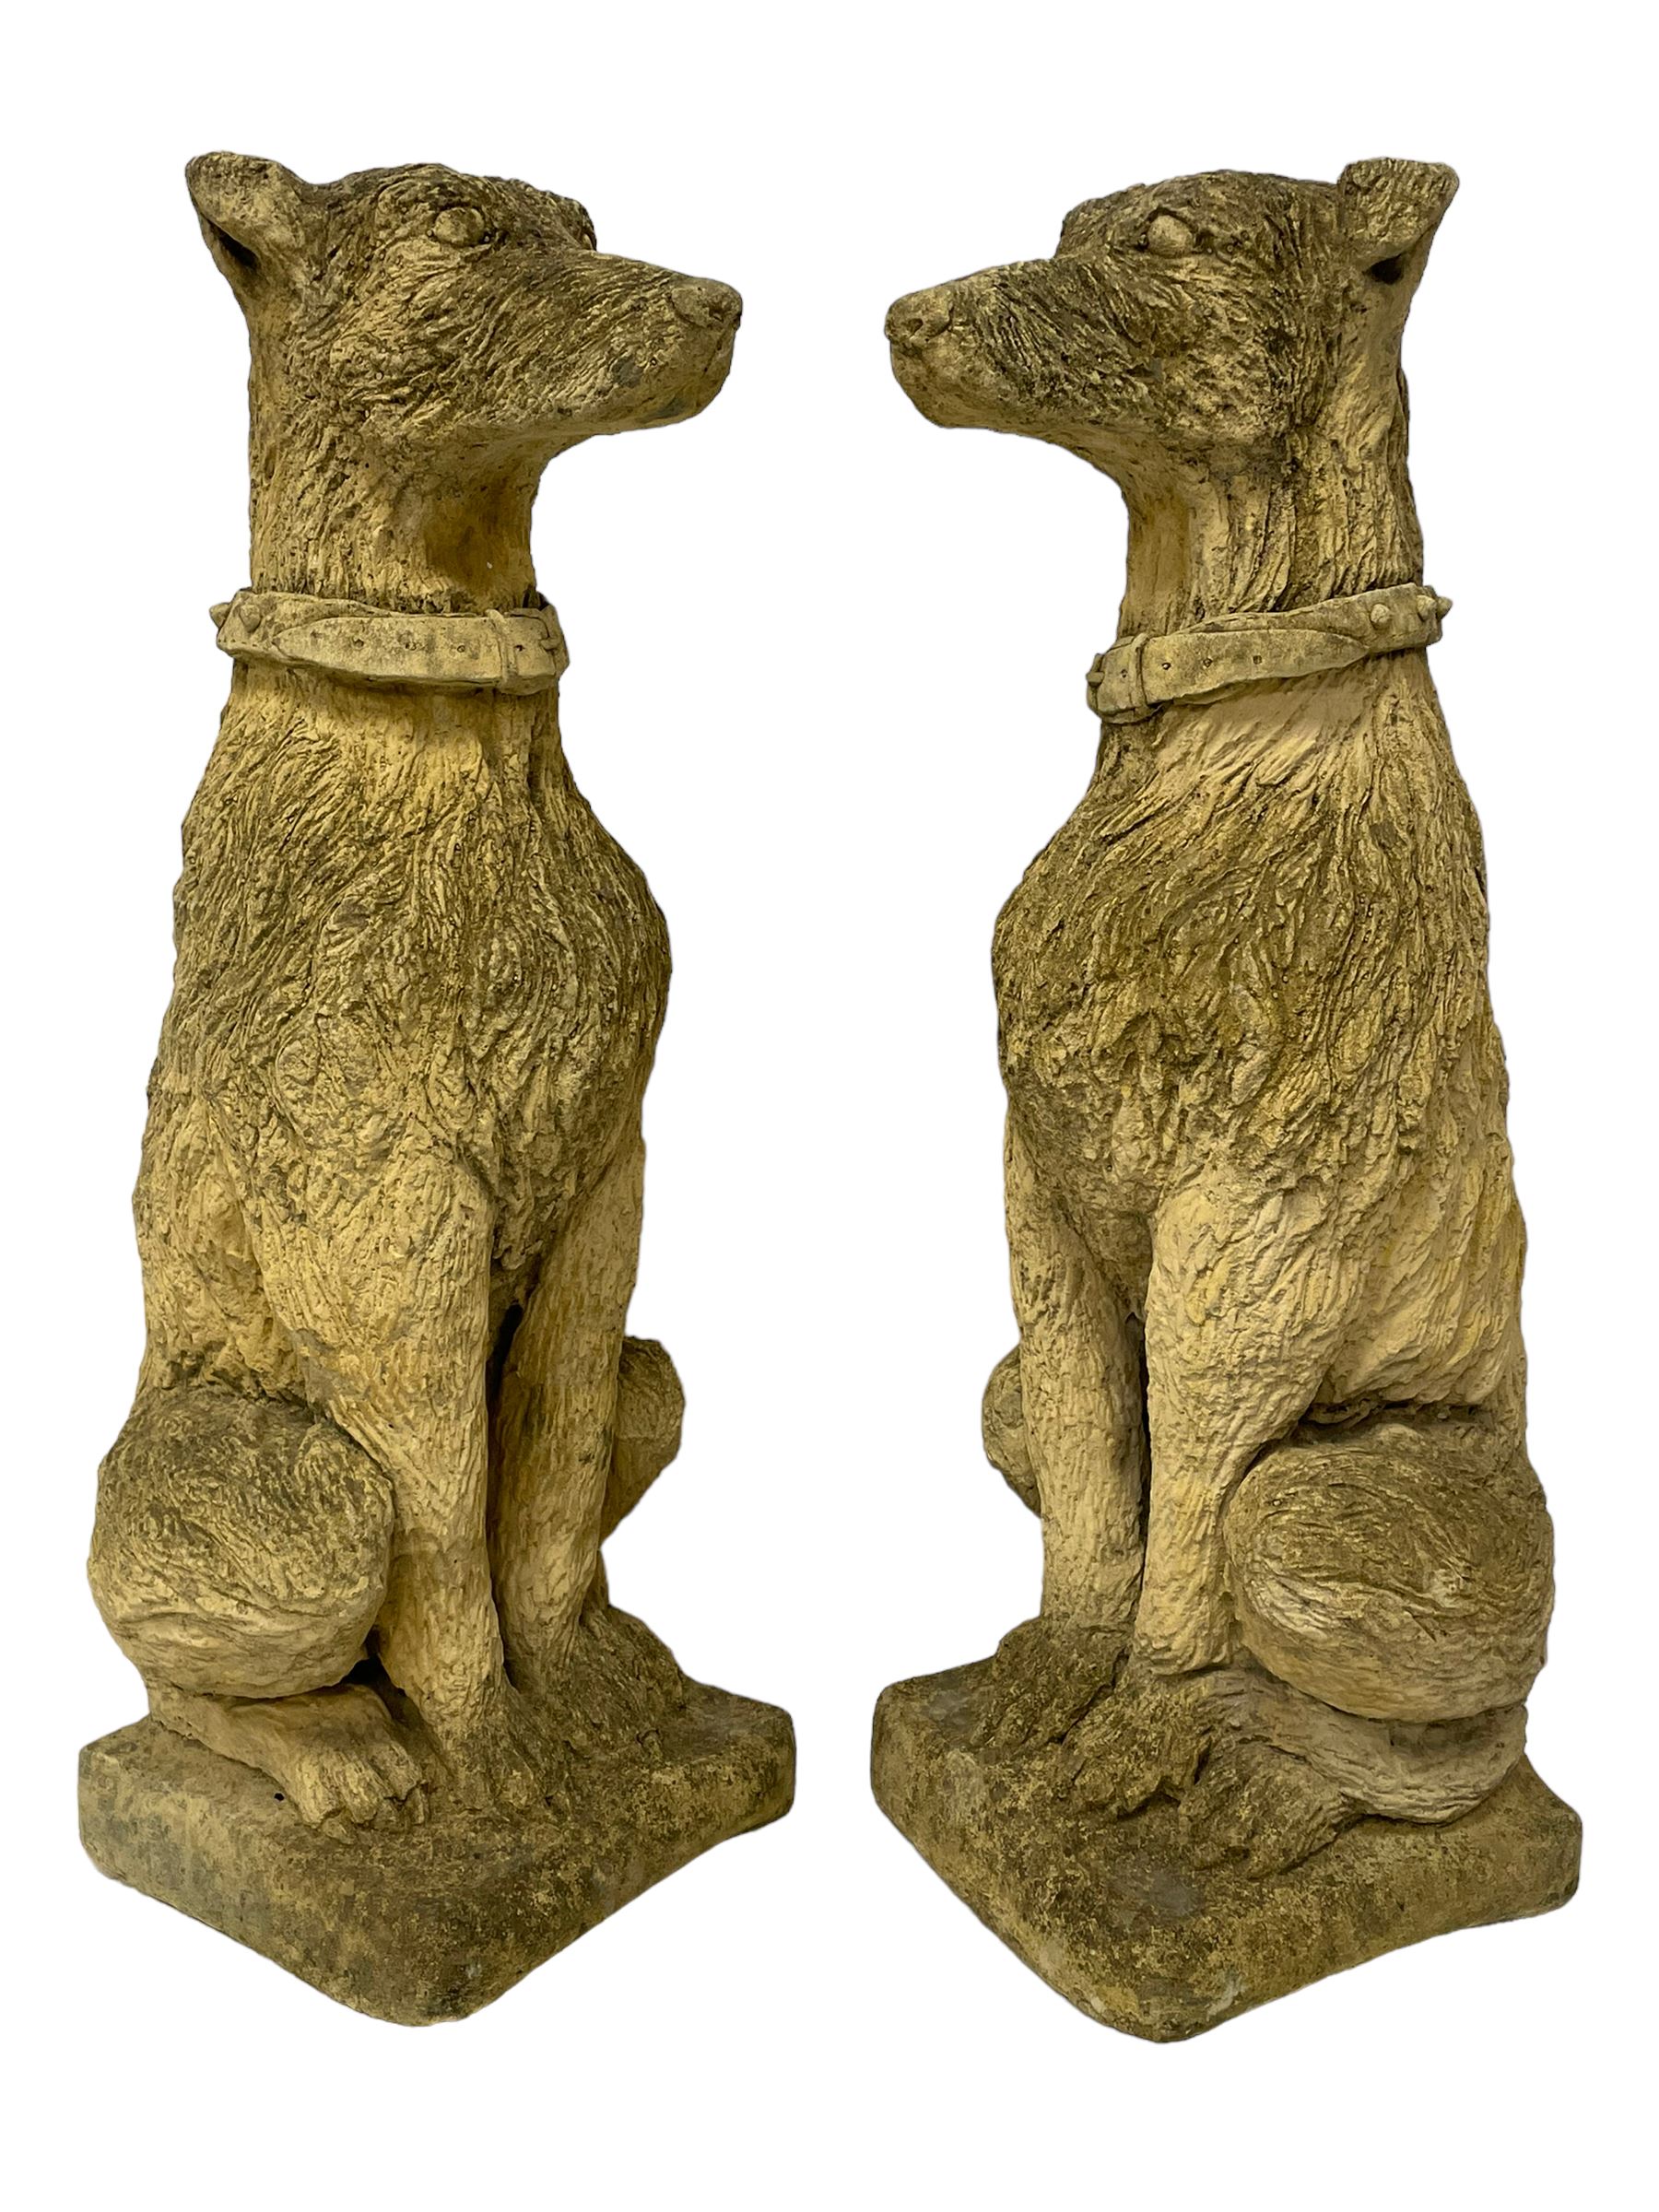 Pair of composite stone garden ornaments in the form of seated lurchers